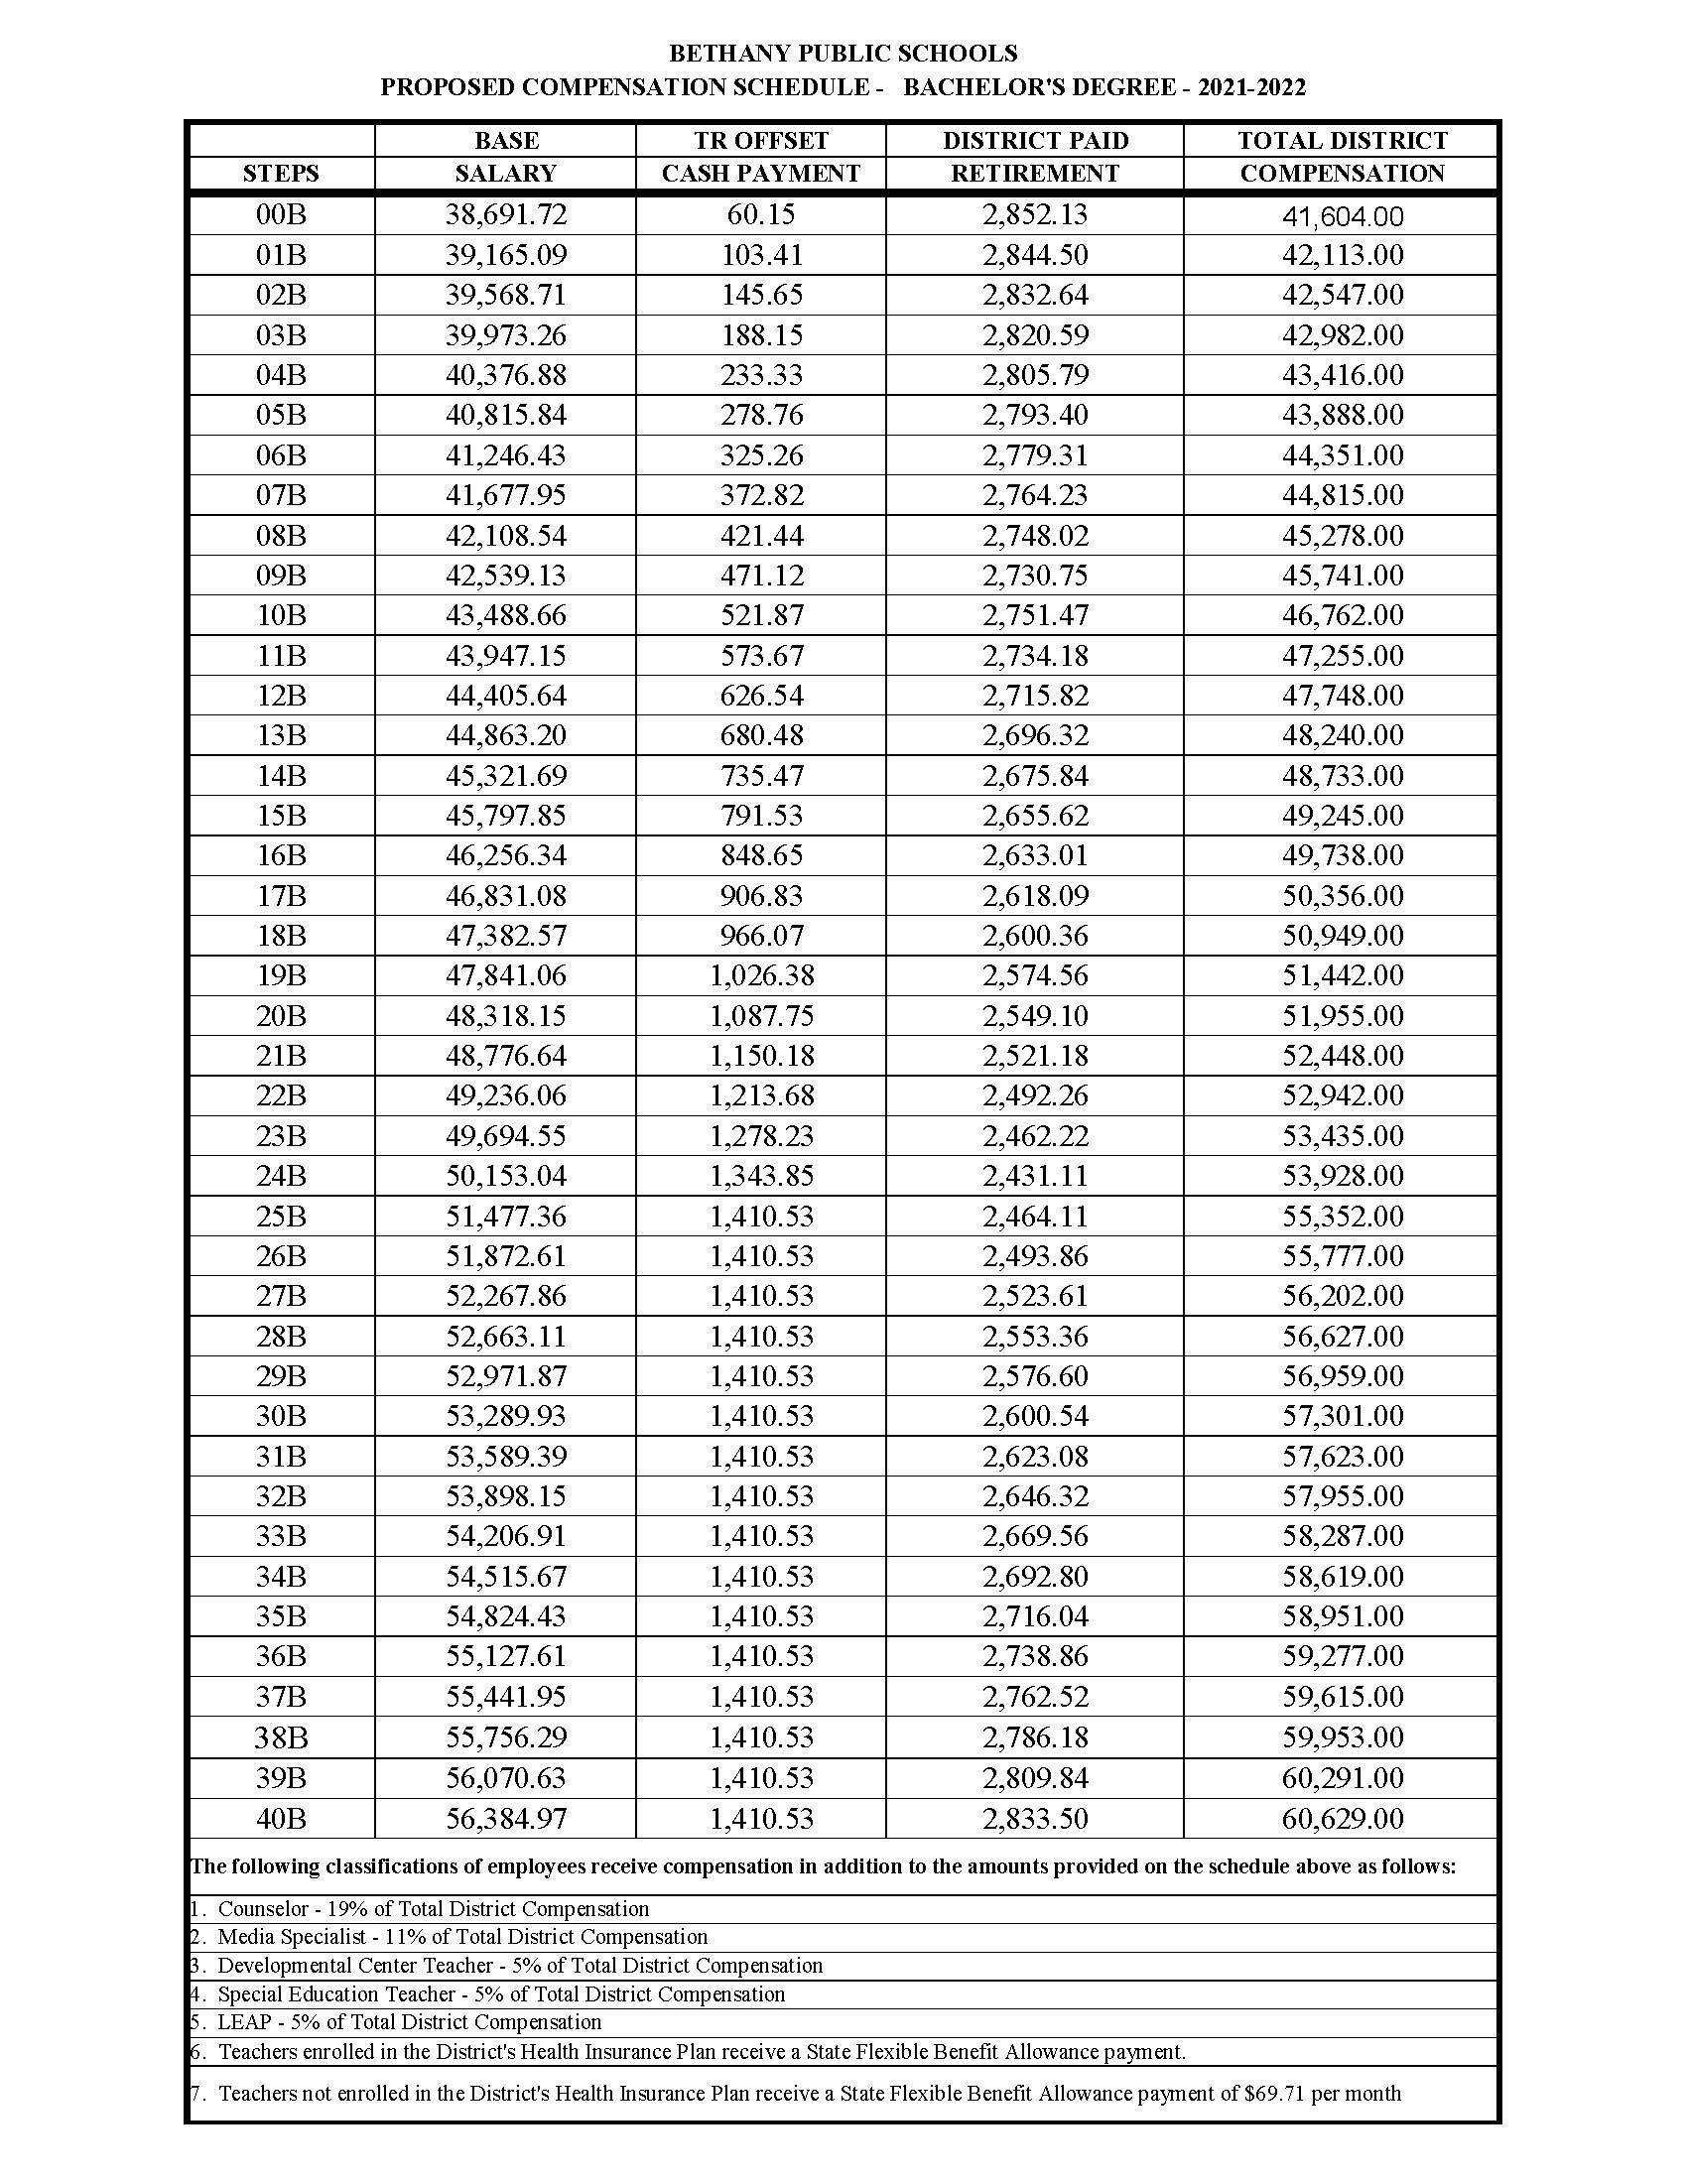 2021-22 Bachelor’s Salary Schedule